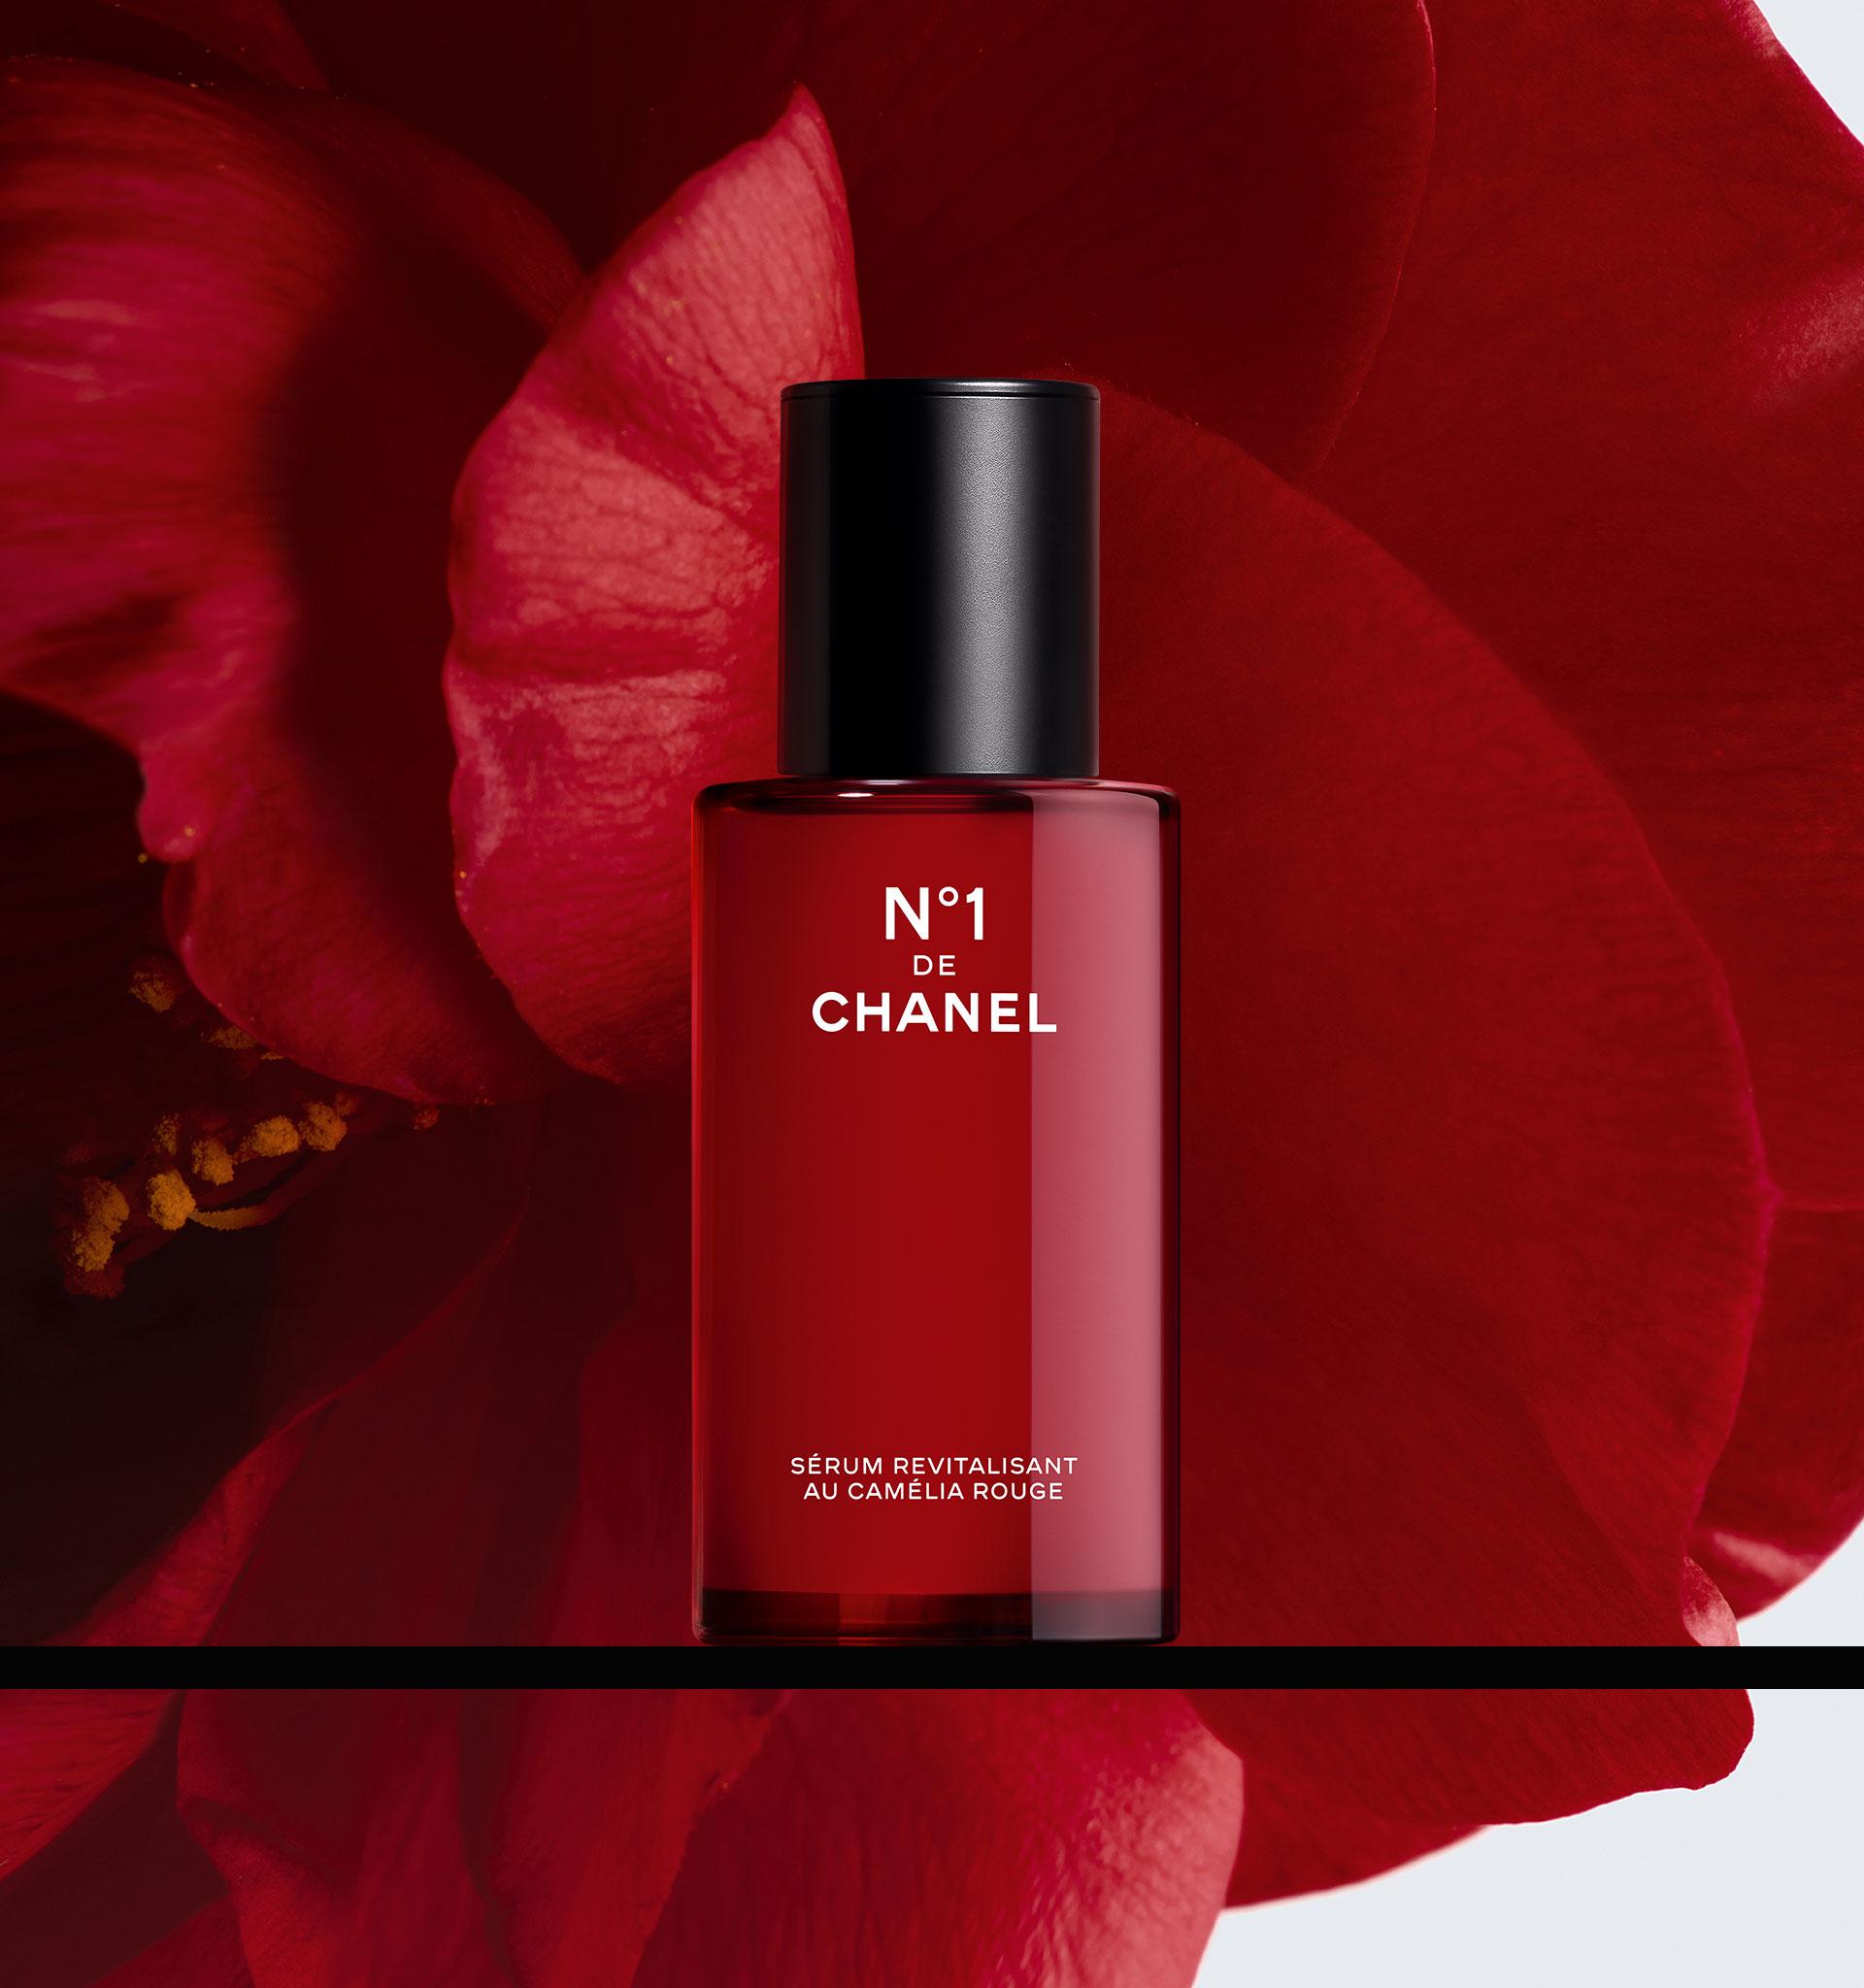 Chanel launches N°1, a new beauty range that embraces naturality